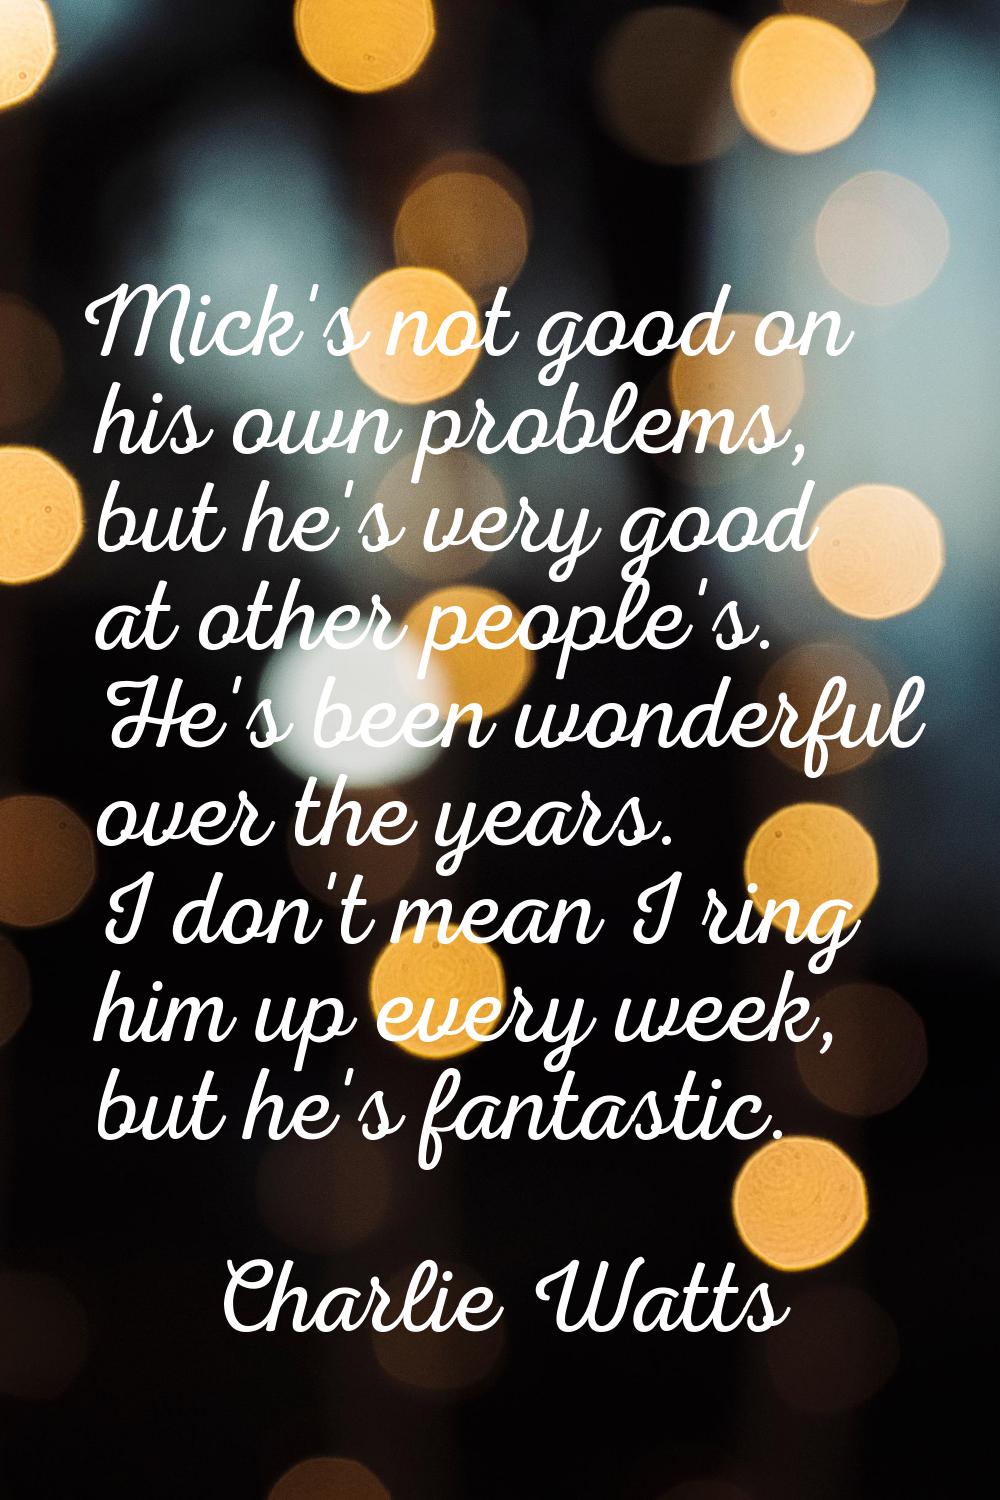 Mick's not good on his own problems, but he's very good at other people's. He's been wonderful over